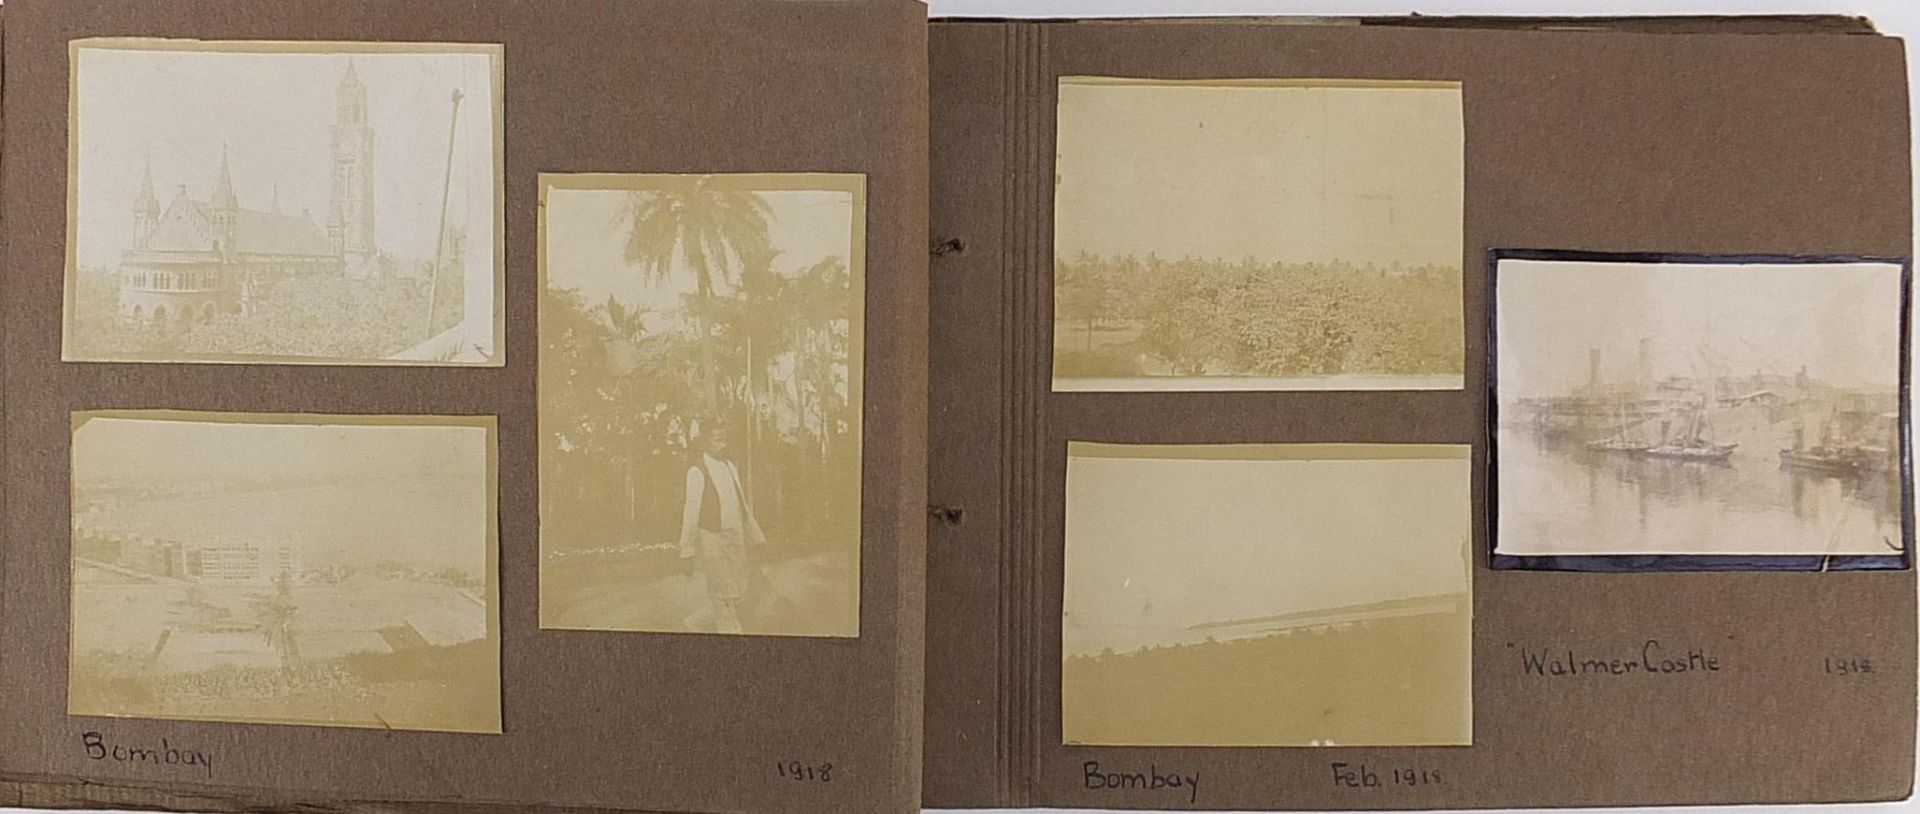 Military interest photograph album relating to the Lancashire Fusiliers including Cape Town and - Image 2 of 6